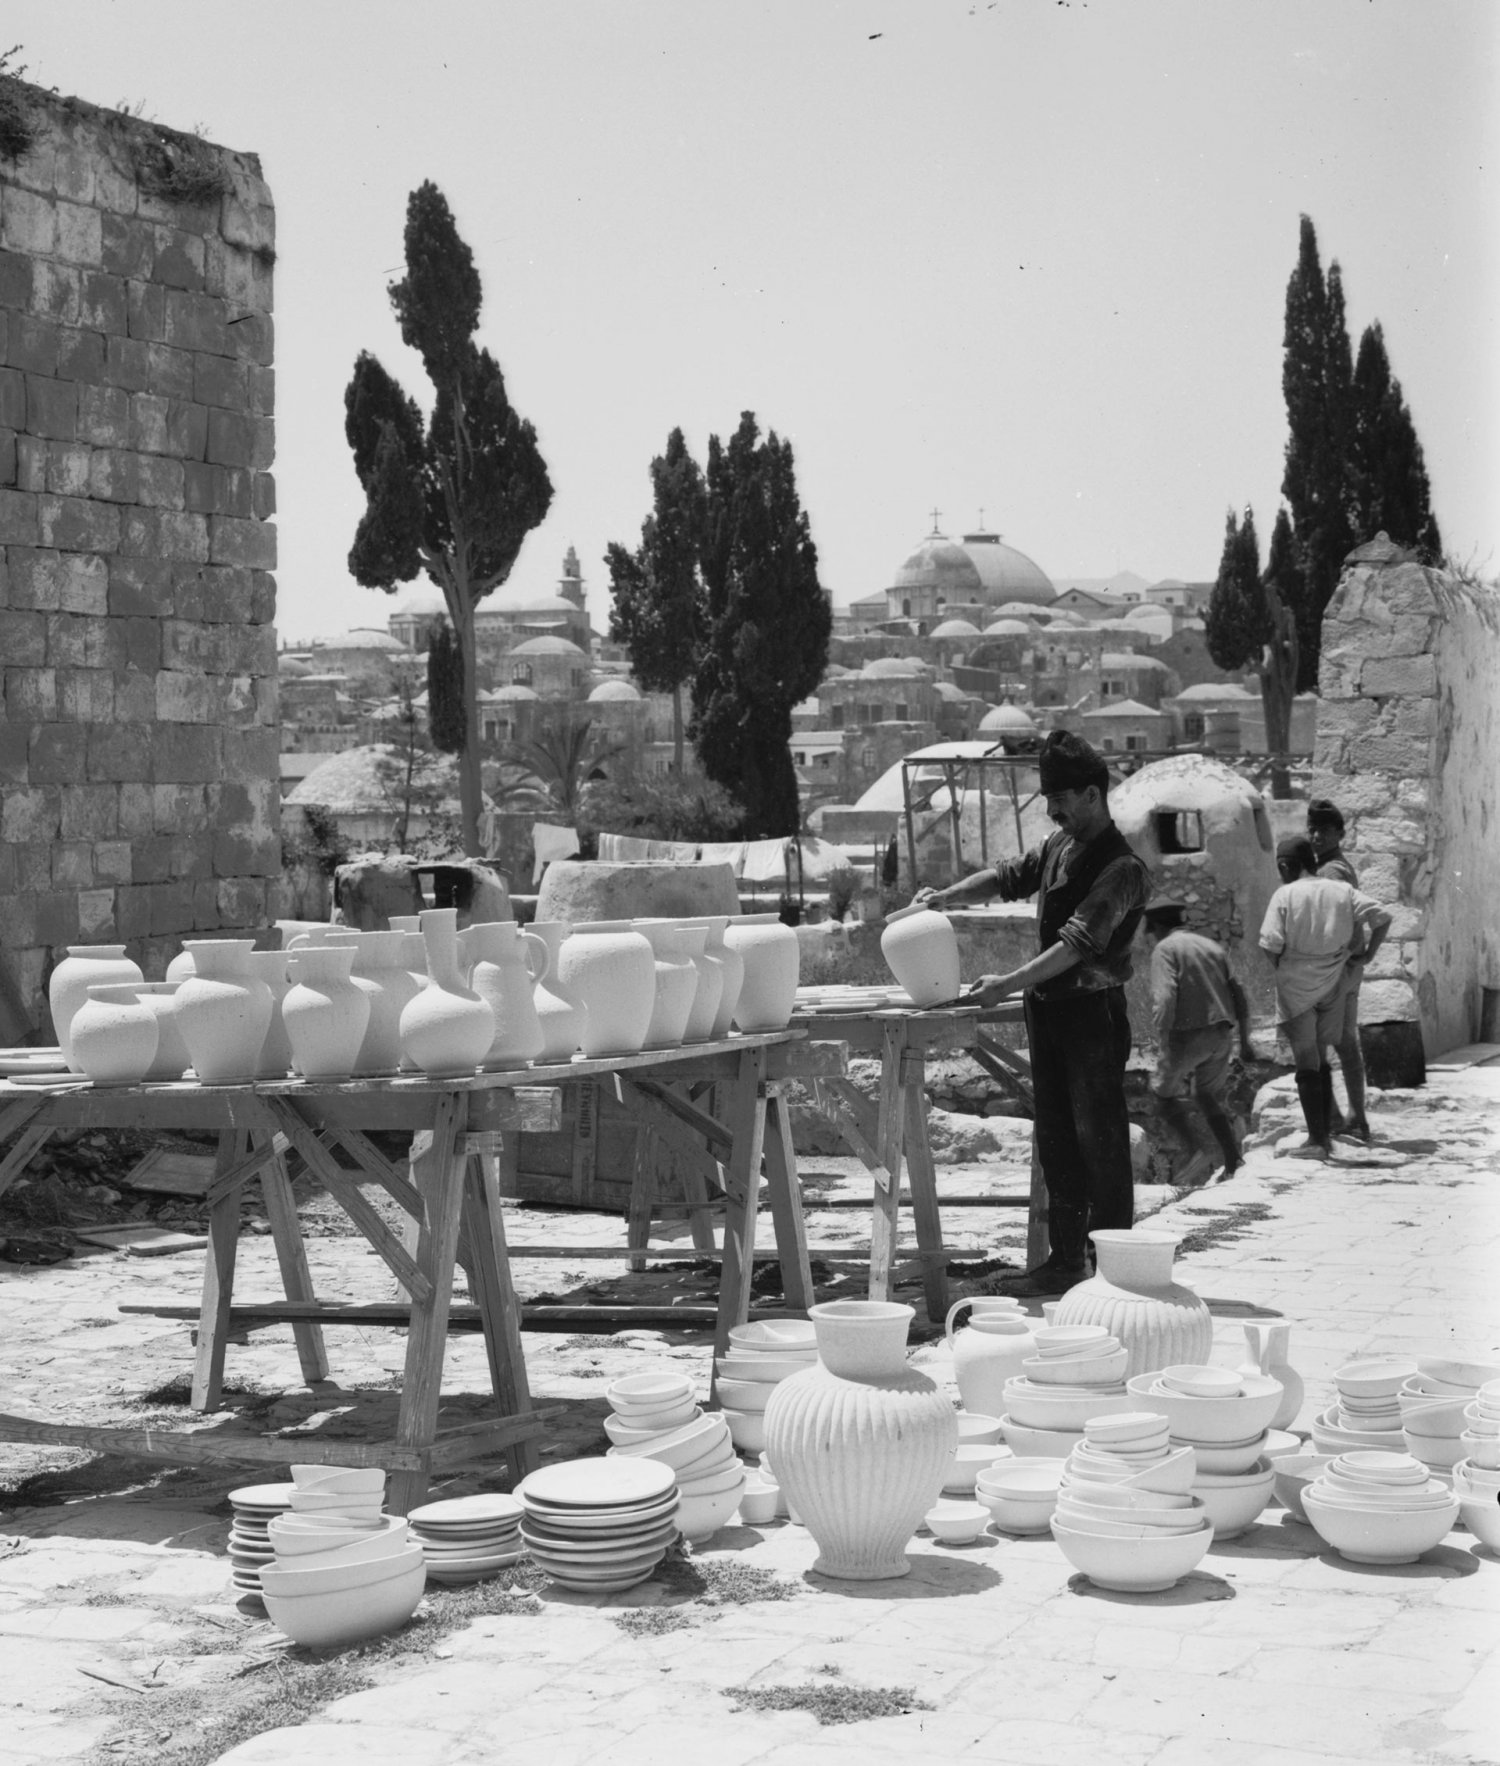 Clay jars and vases drying in the sun outside the Dome of the Rock Tiles workshop, Via Dolorosa, Jerusalem, 1920s